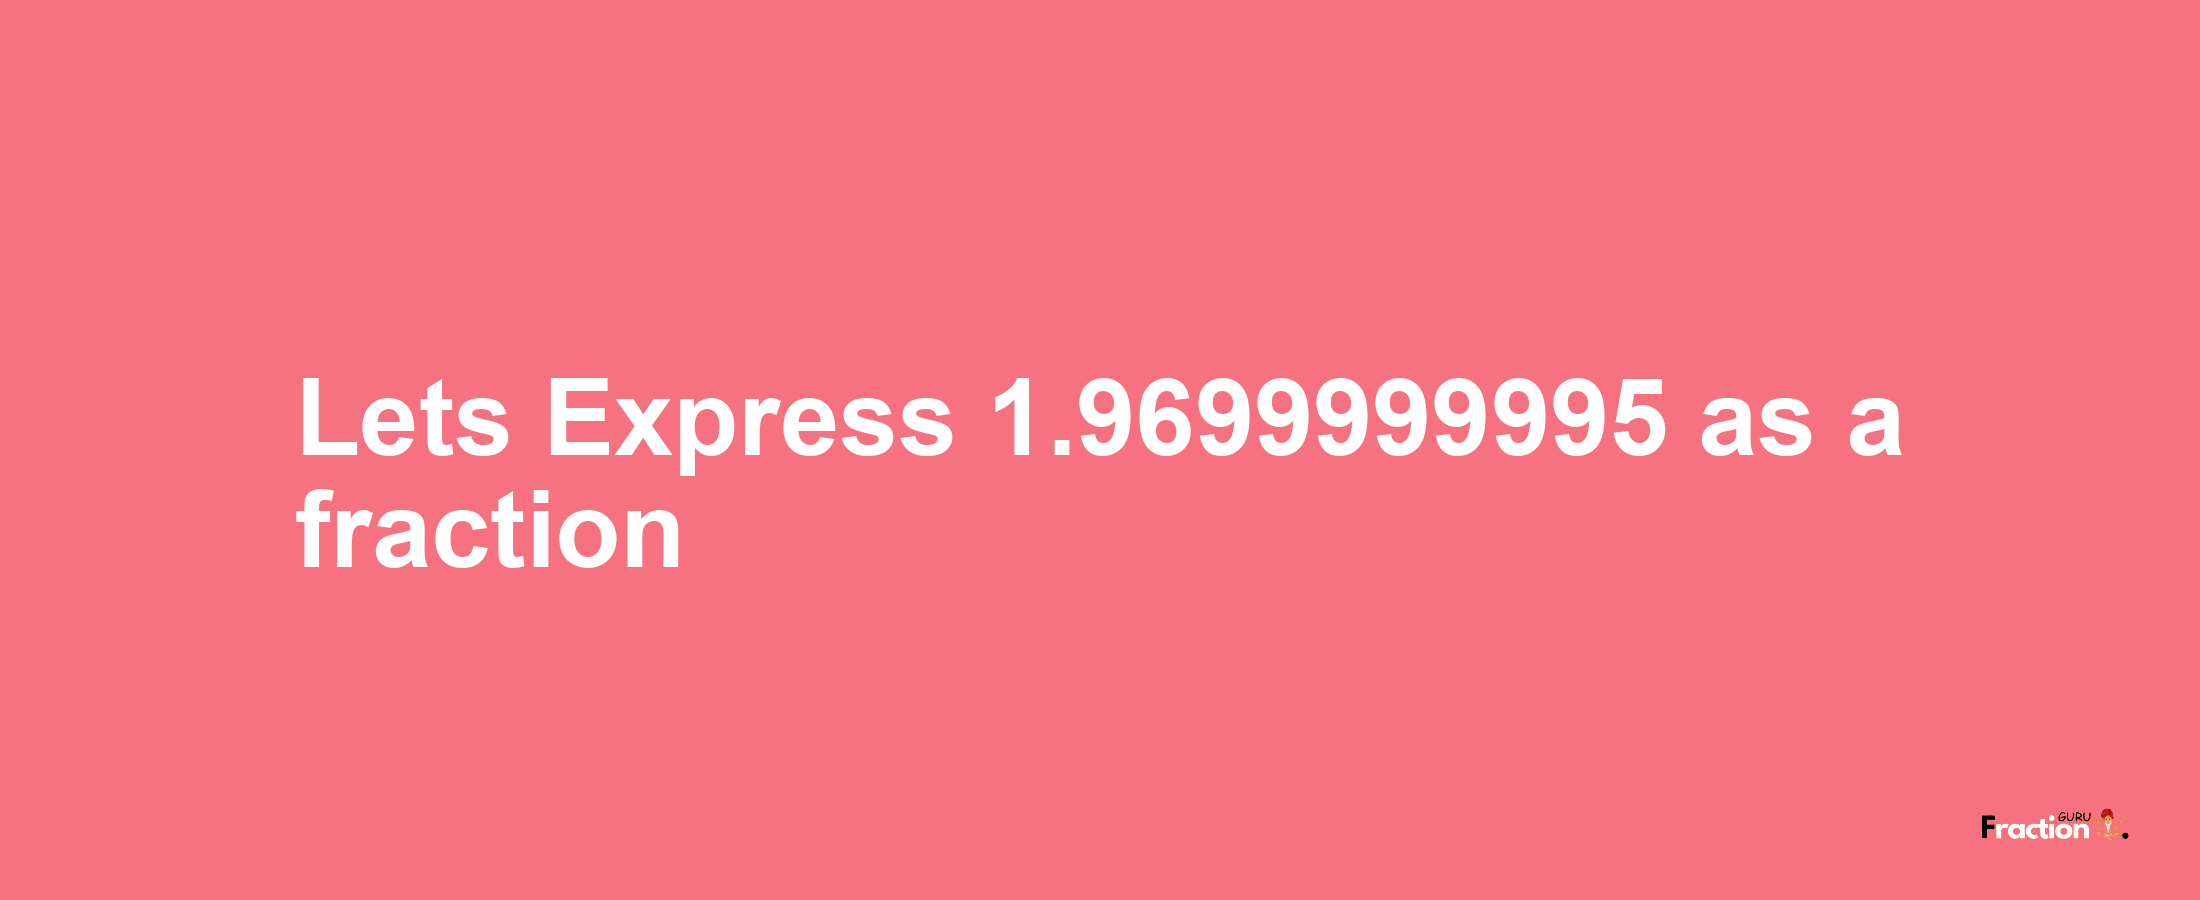 Lets Express 1.9699999995 as afraction